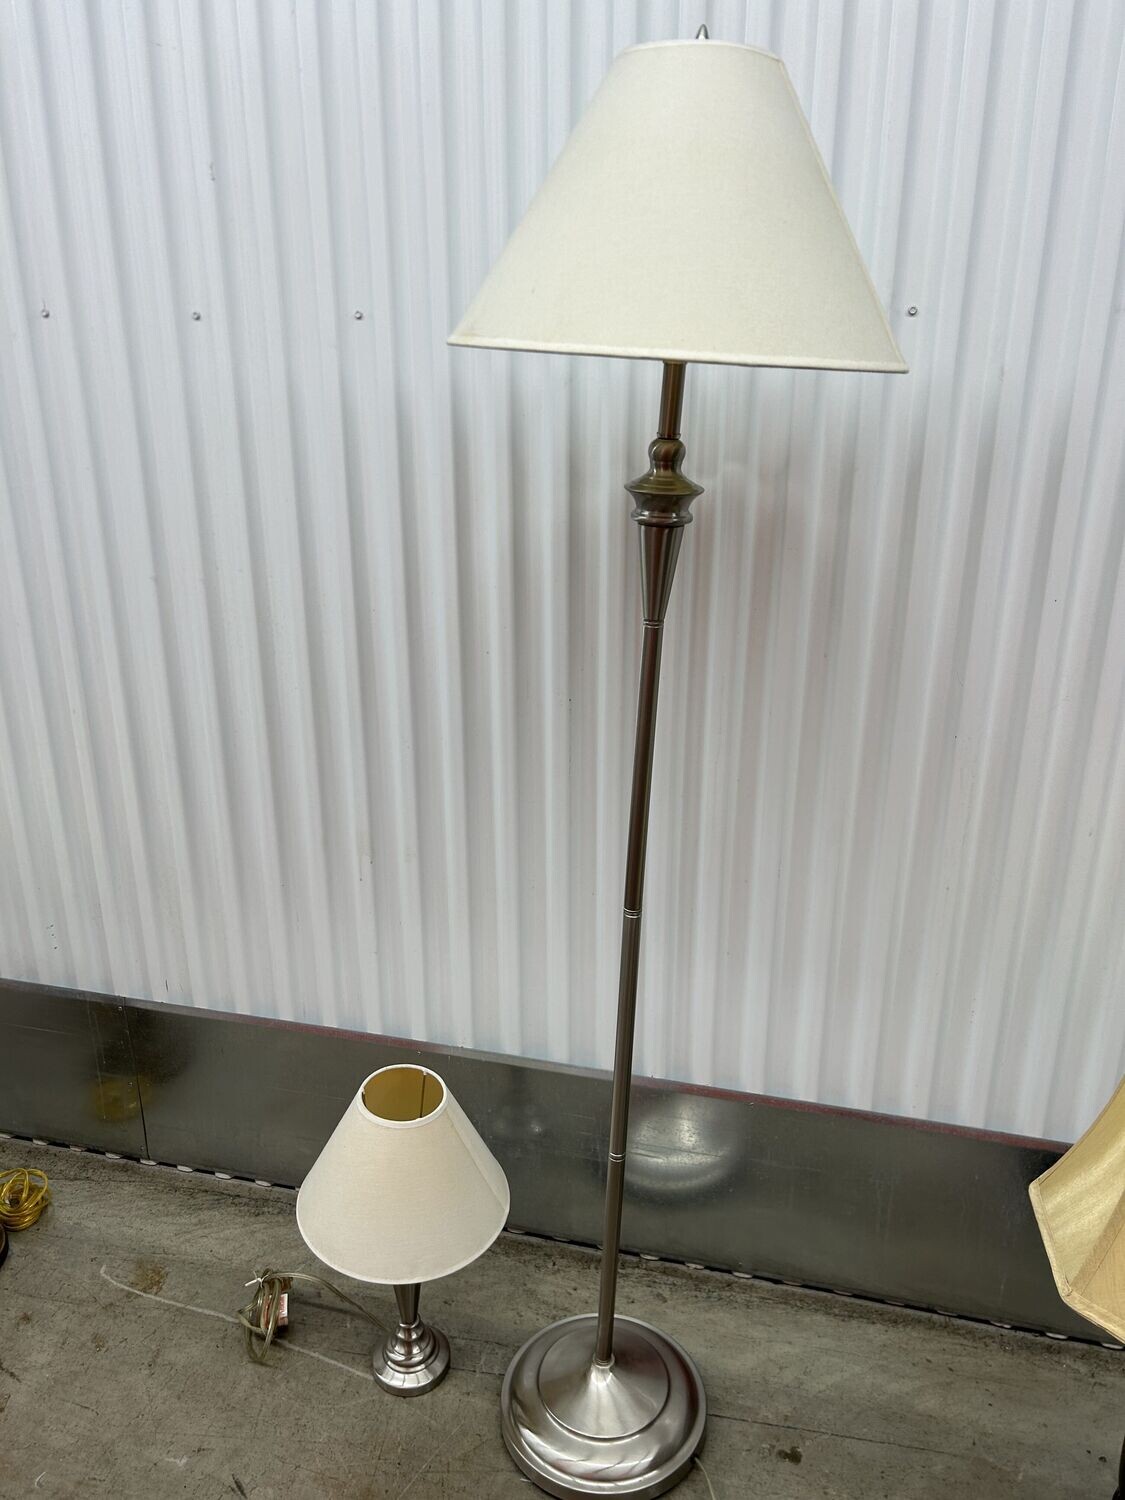 ** Matching Floor &amp; Table Lamps, brushed nickel #2213